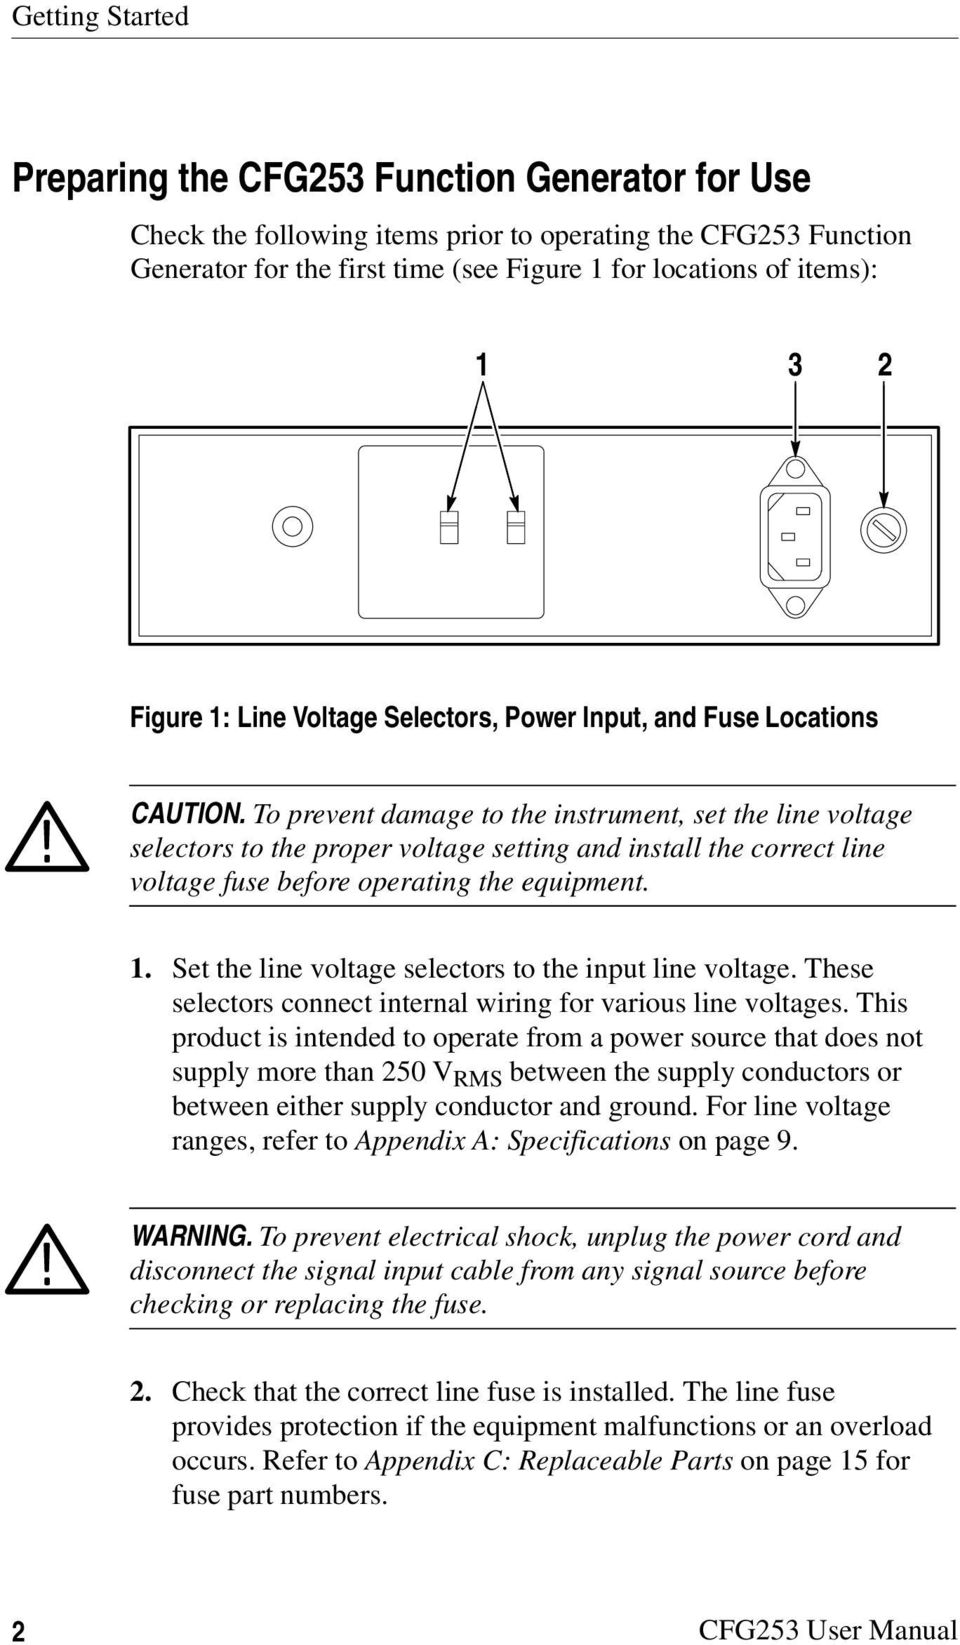 To prevent damage to the instrument, set the line voltage selectors to the proper voltage setting and install the correct line voltage fuse before operating the equipment. 1.